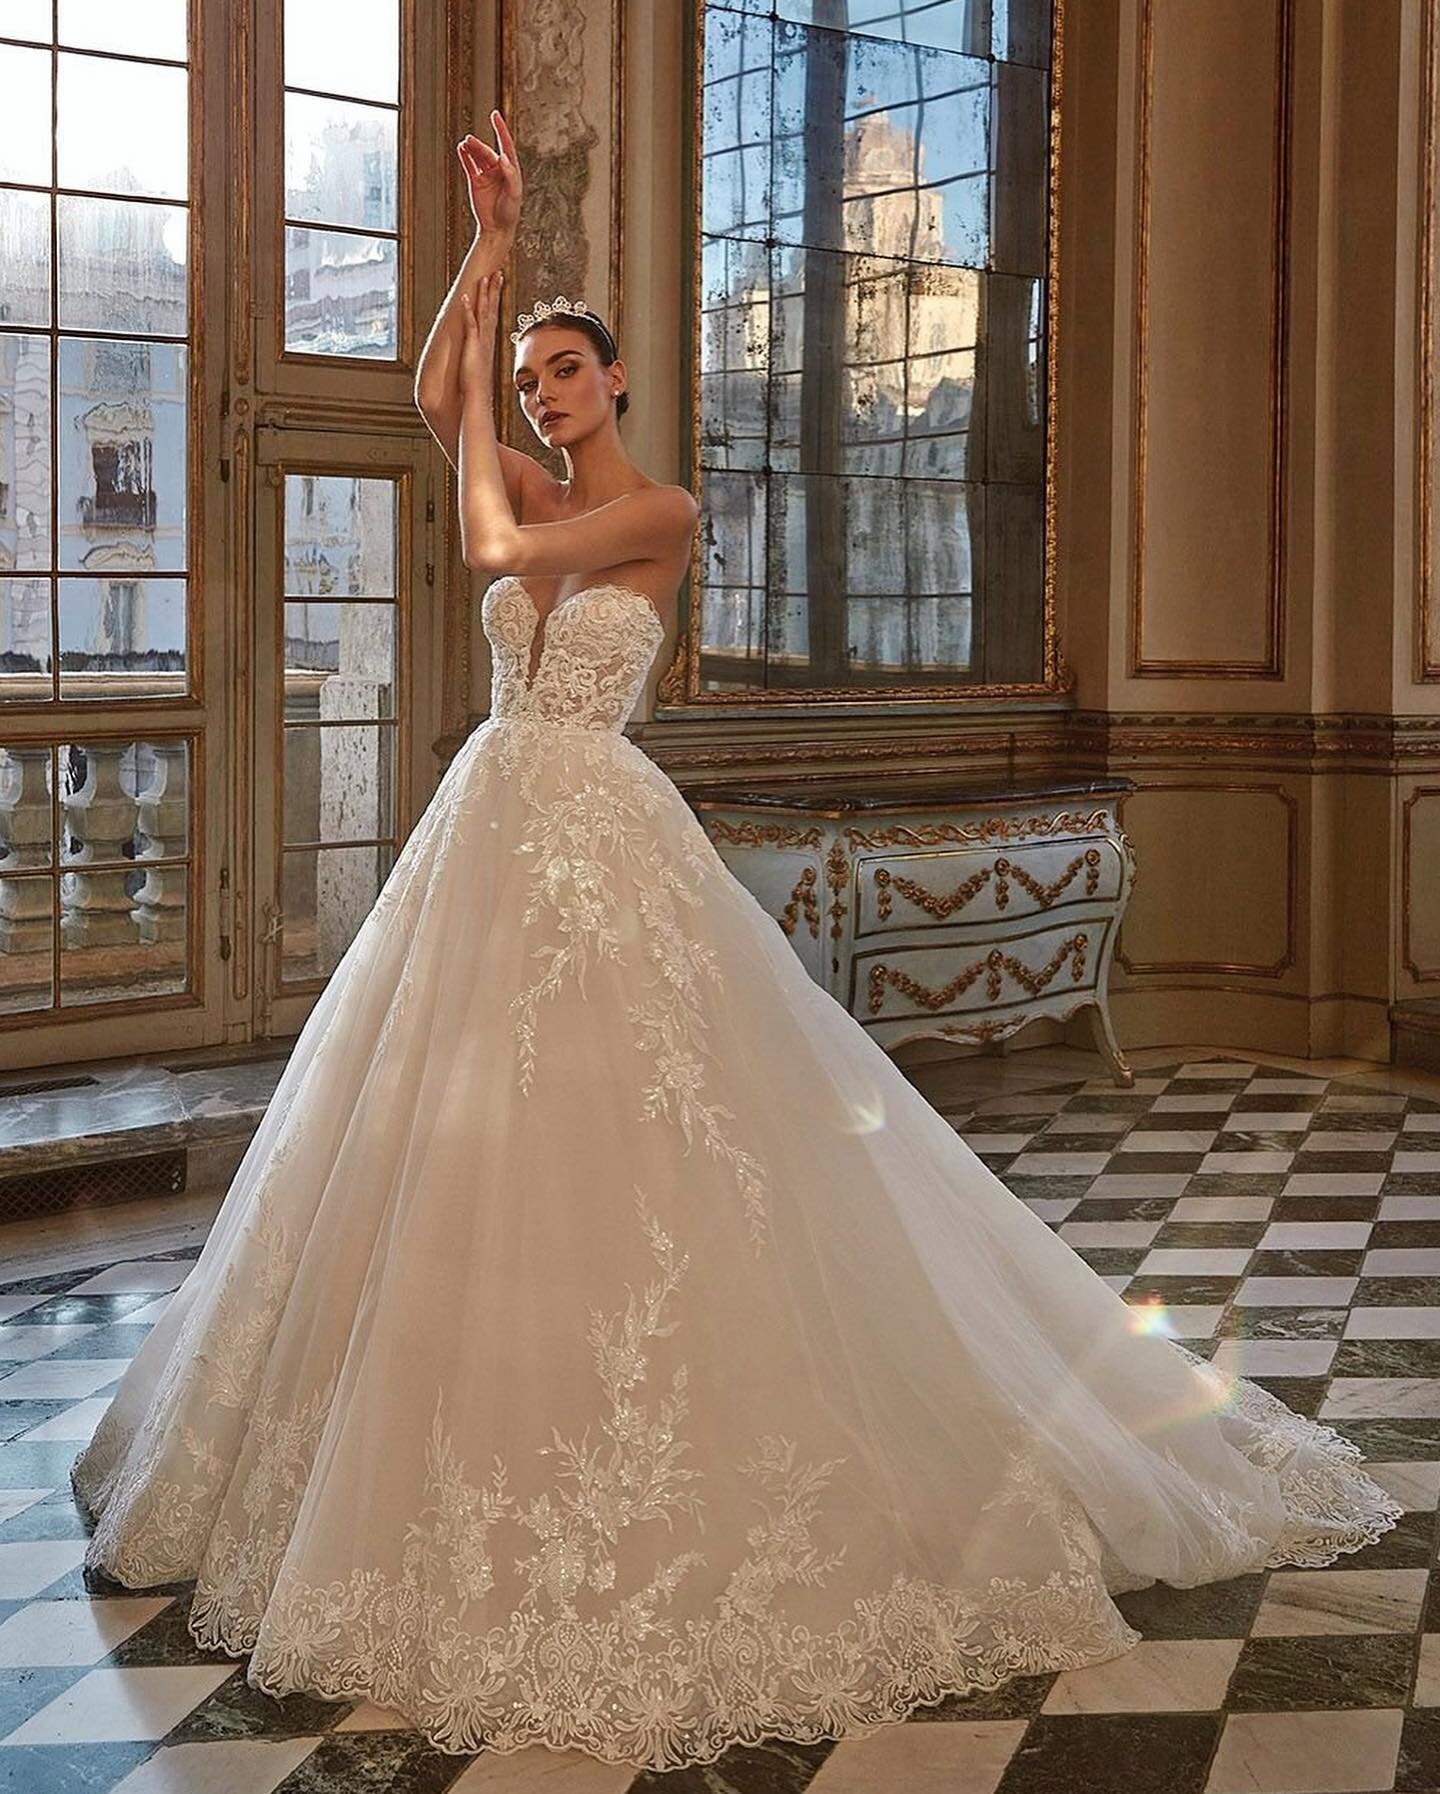 How stunning is this lace ballgown! Dress Electa is now available in our London boutique. With its classic sweetheart plunge neckline, nipped in waist and a fabulous ball gown skirt, you will feel timelessly beautiful as you walk down the aisle.

#pr